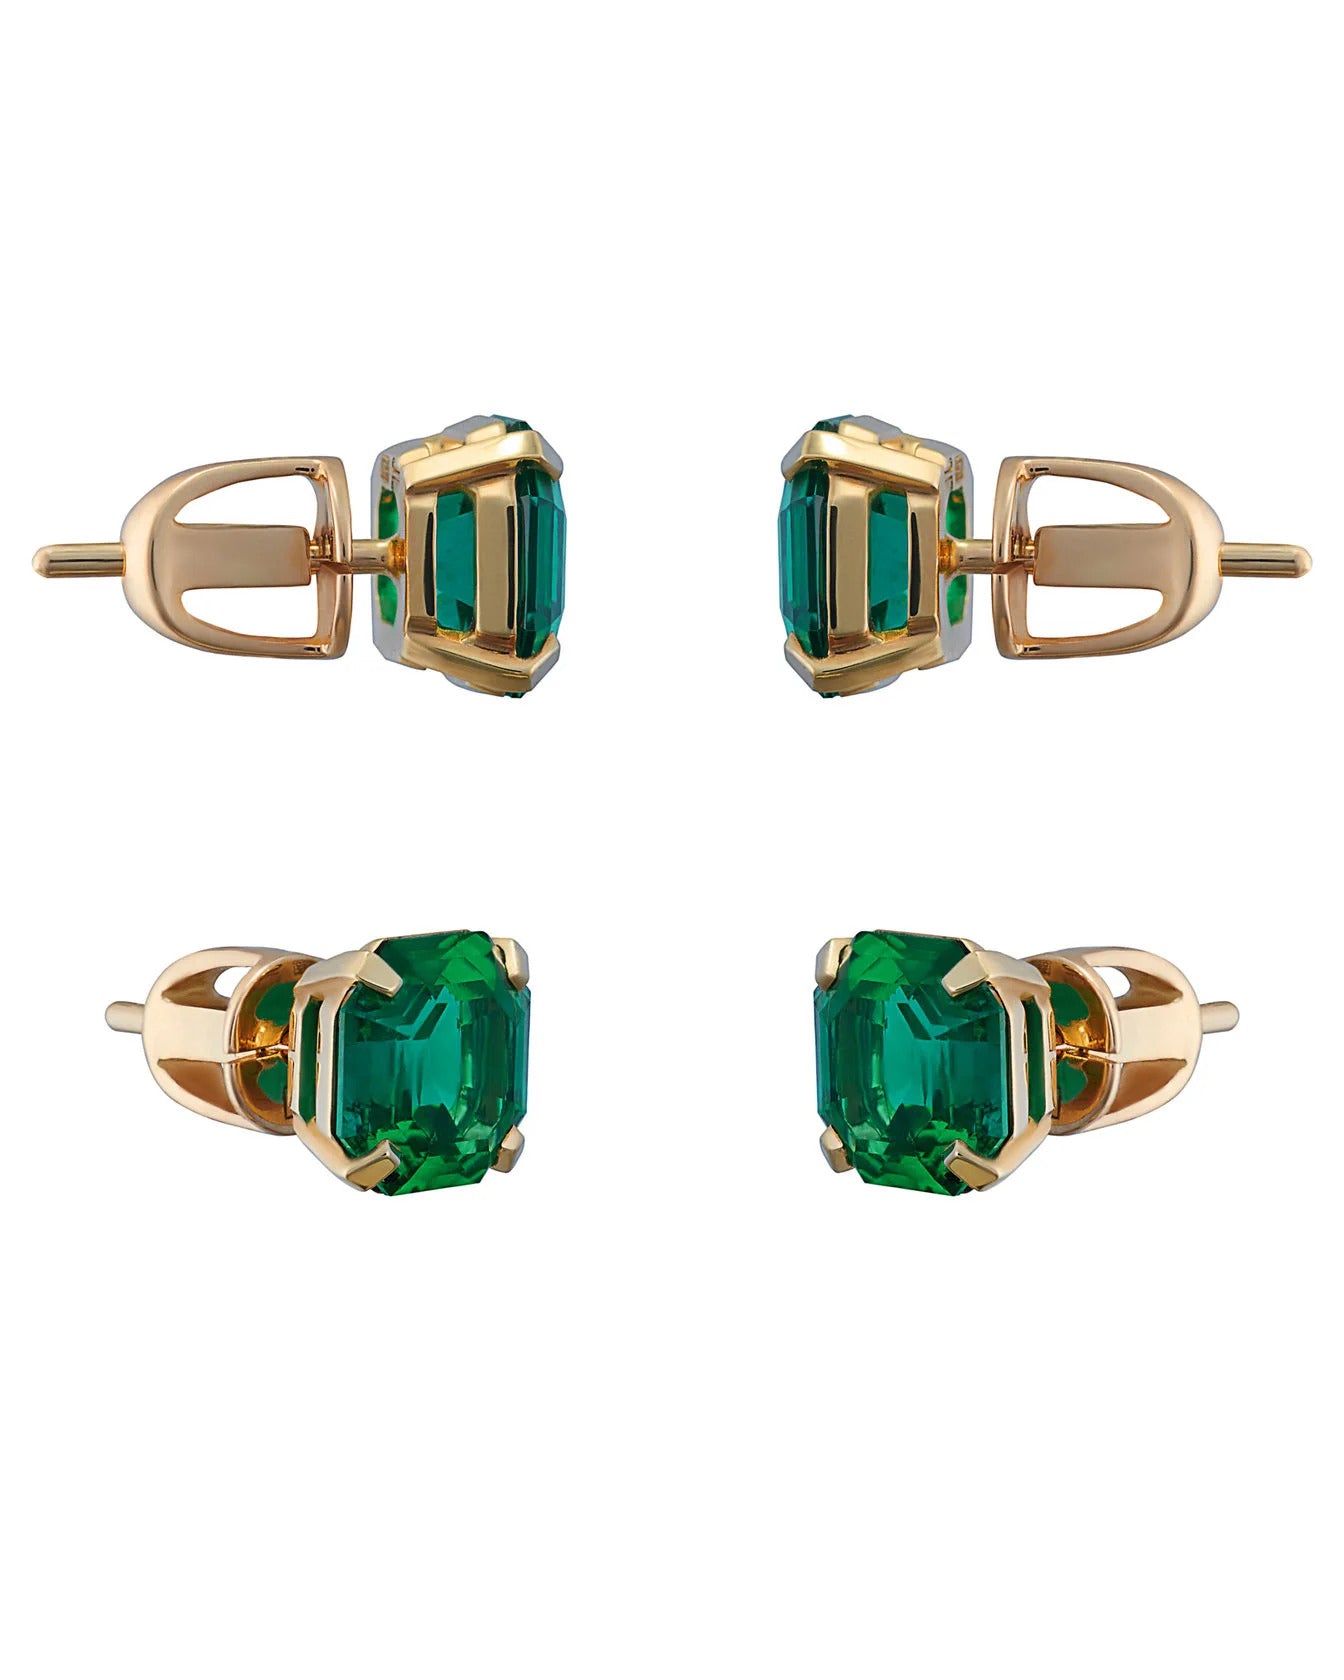 TR17 Octagon earrings with emerald